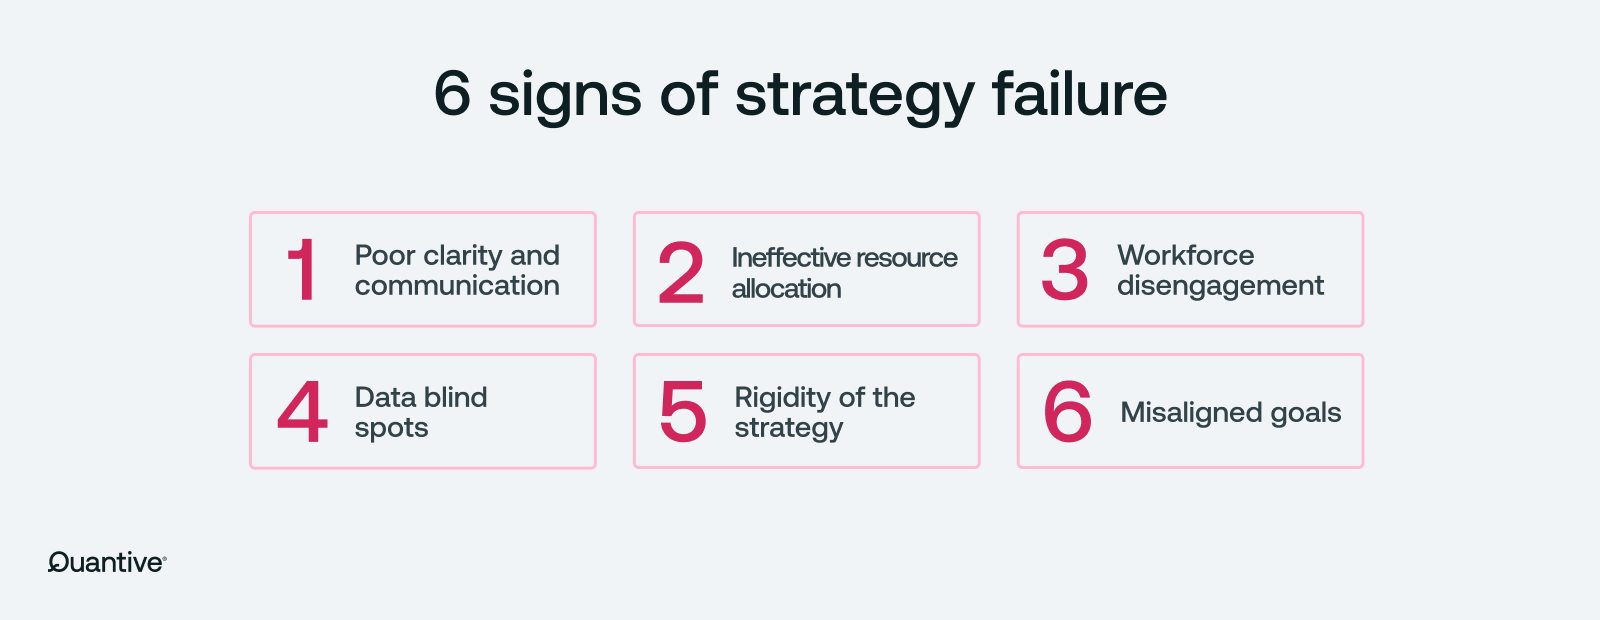 an image showing 6 signs of strategy failure